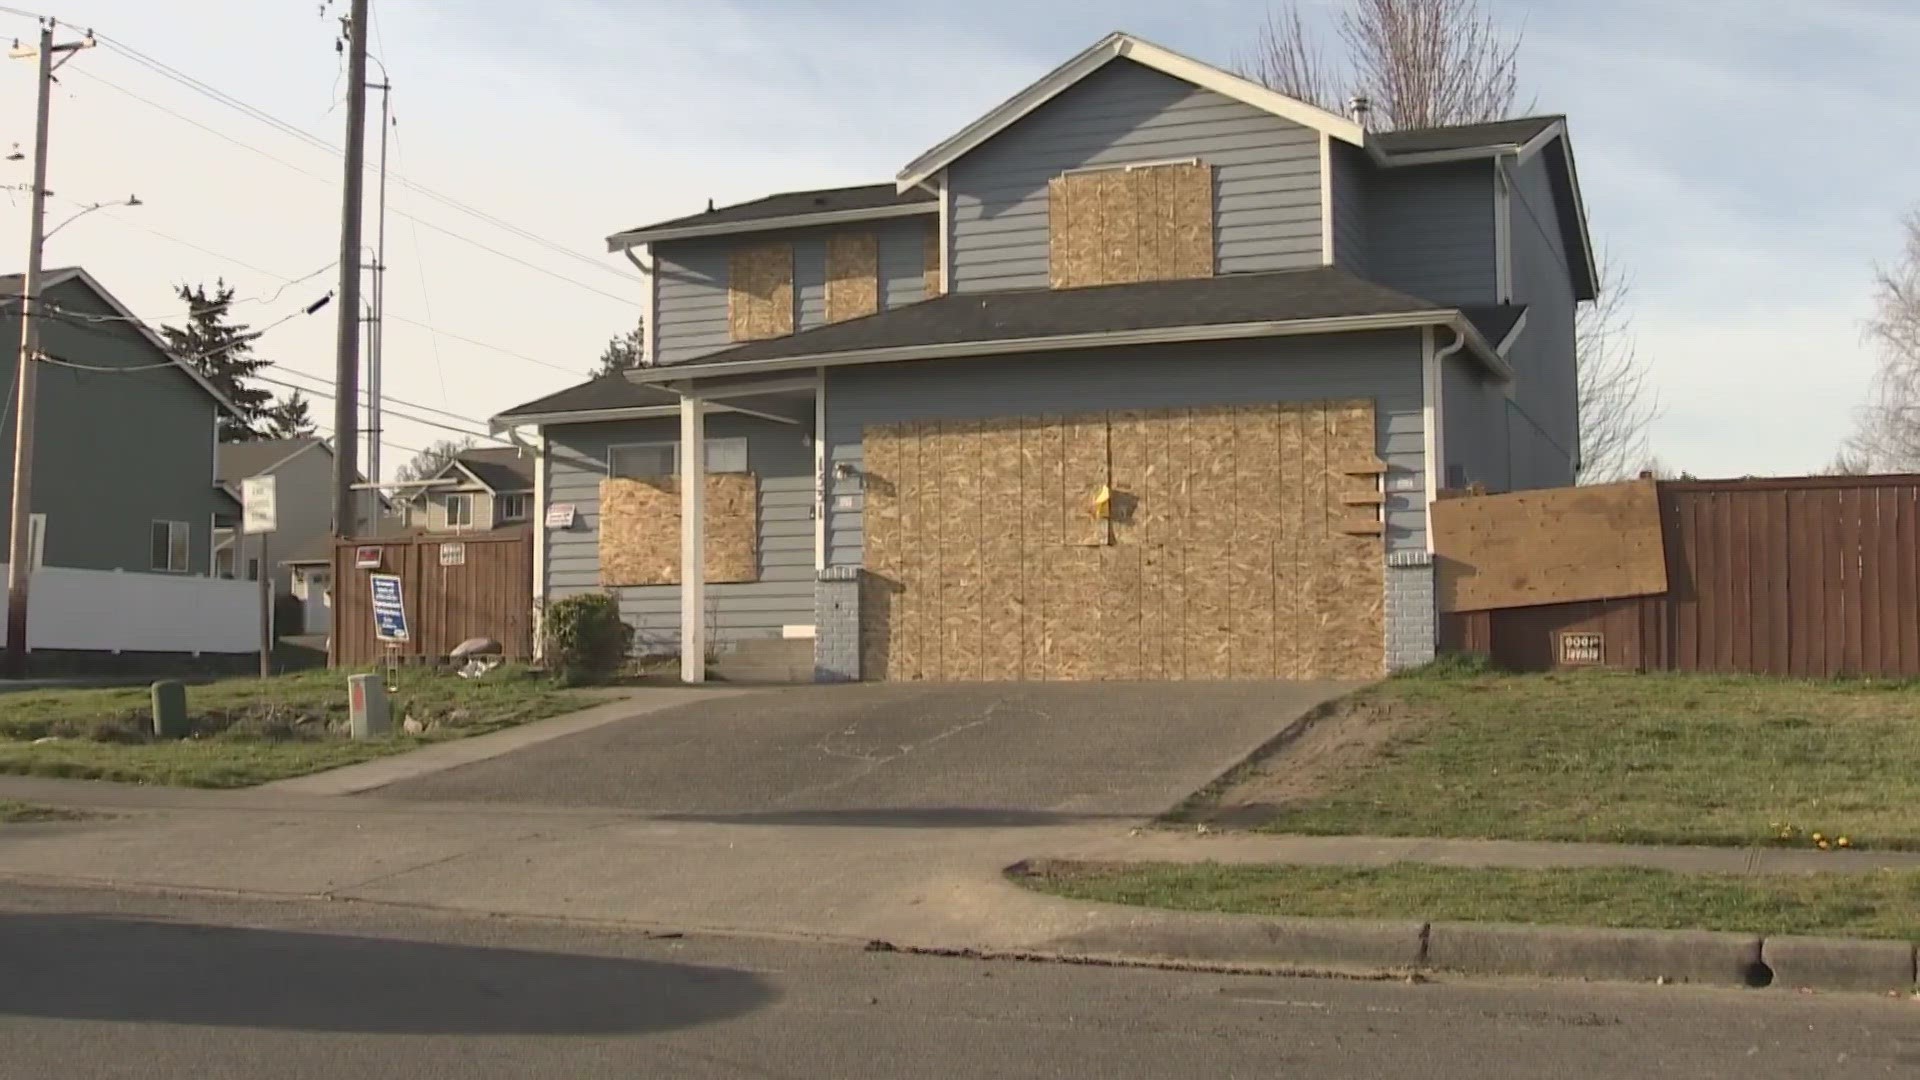 A monthslong investigation found the home was a hotspot for drive-by shootings and stolen vehicles.